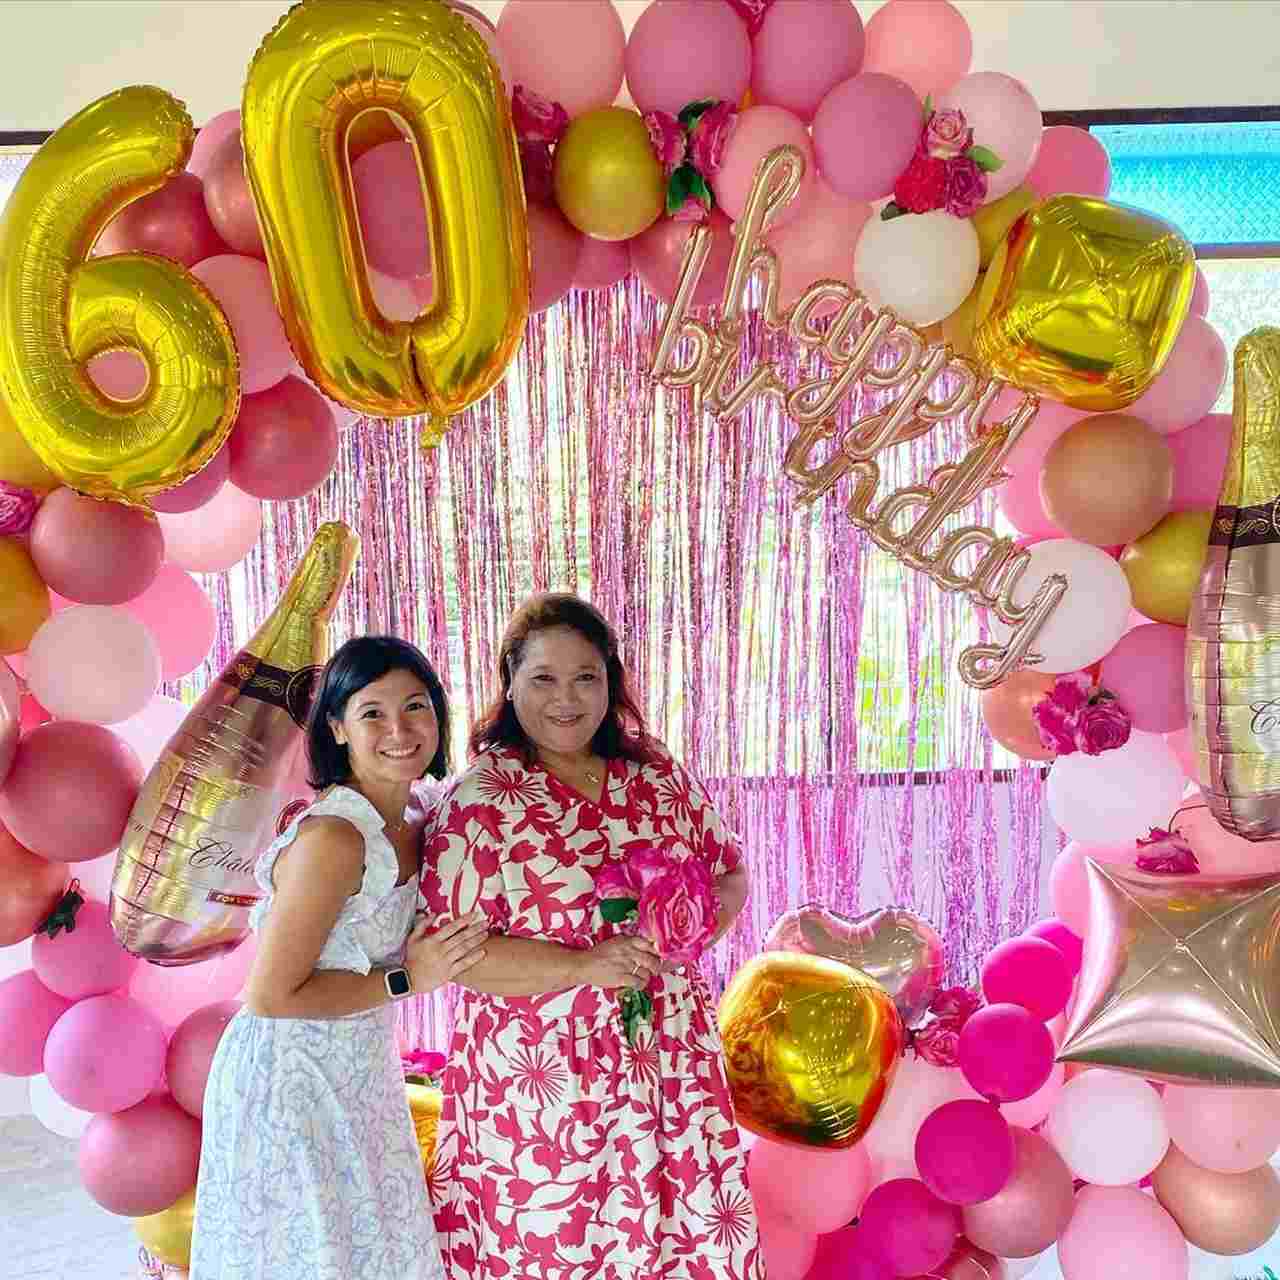 Camille Prats' sweet message for her mom's 60th birthday